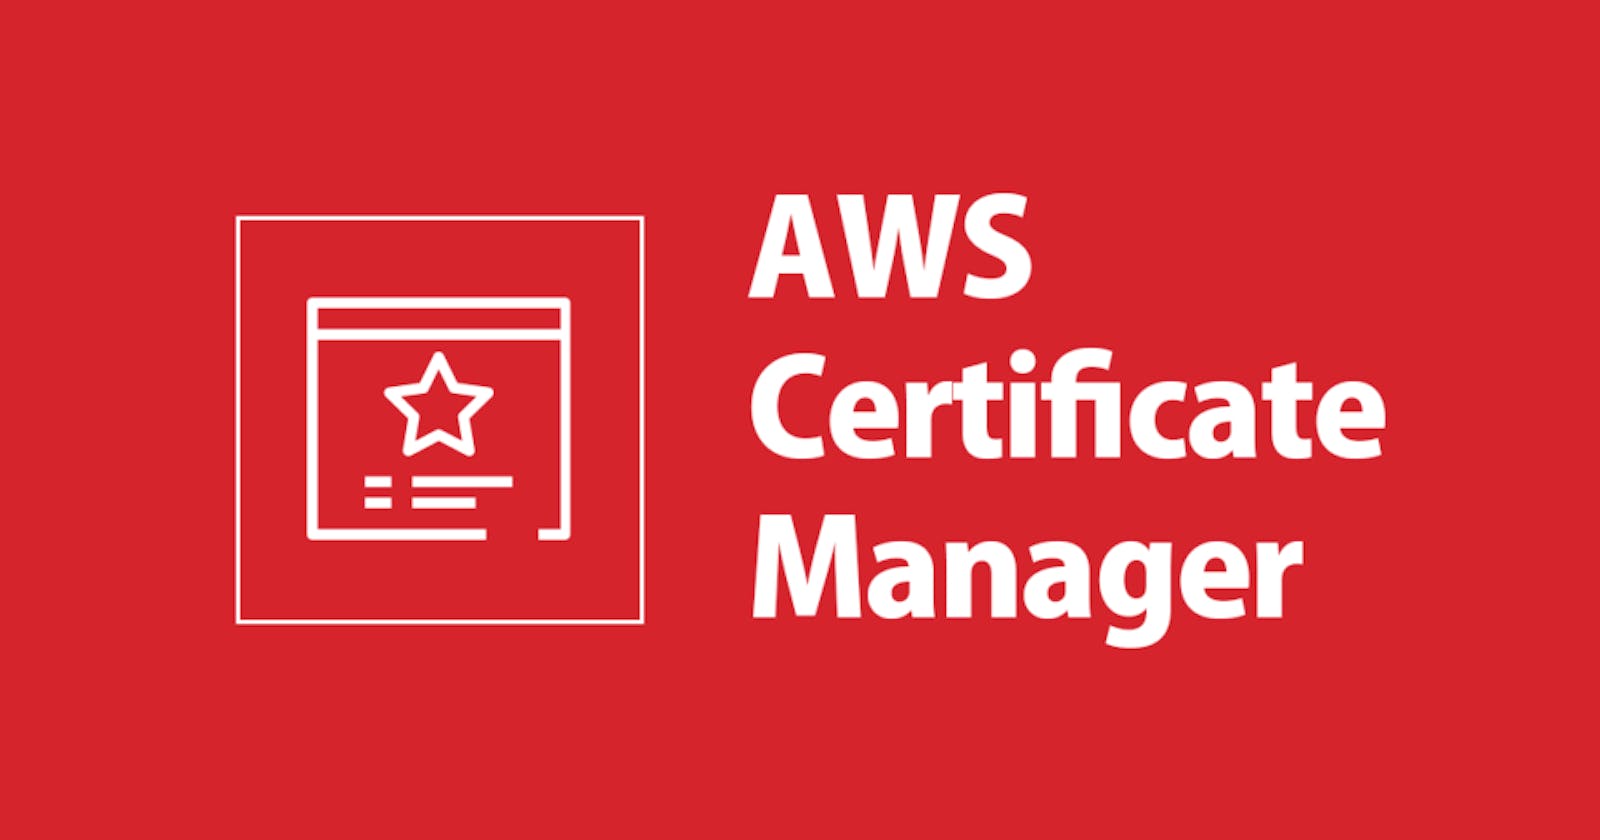 Implementing Certificate Manager in AWS